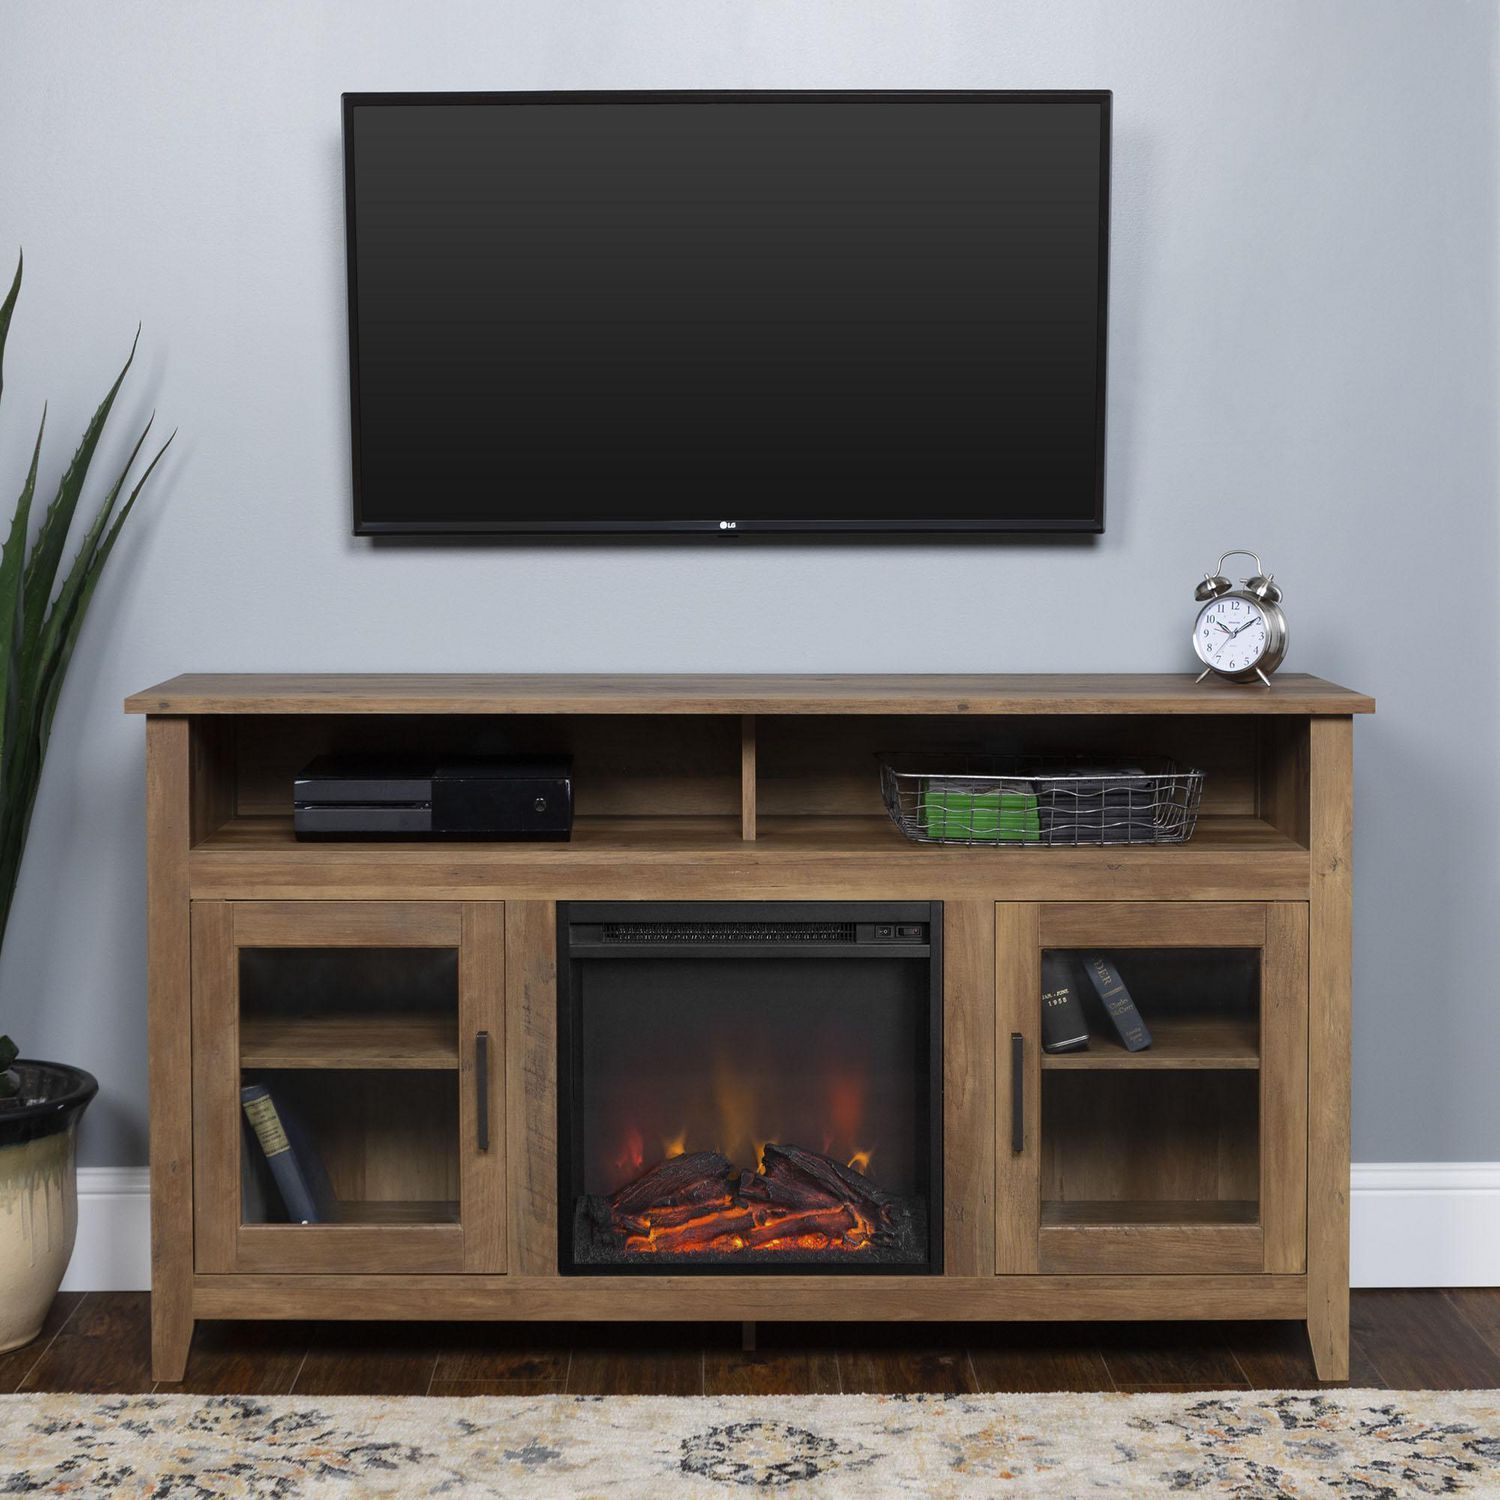 58" Wood Highboy Fireplace Tv Stand – Rustic Oak | Walmart Canada Regarding Wood Highboy Fireplace Tv Stands (Gallery 9 of 20)